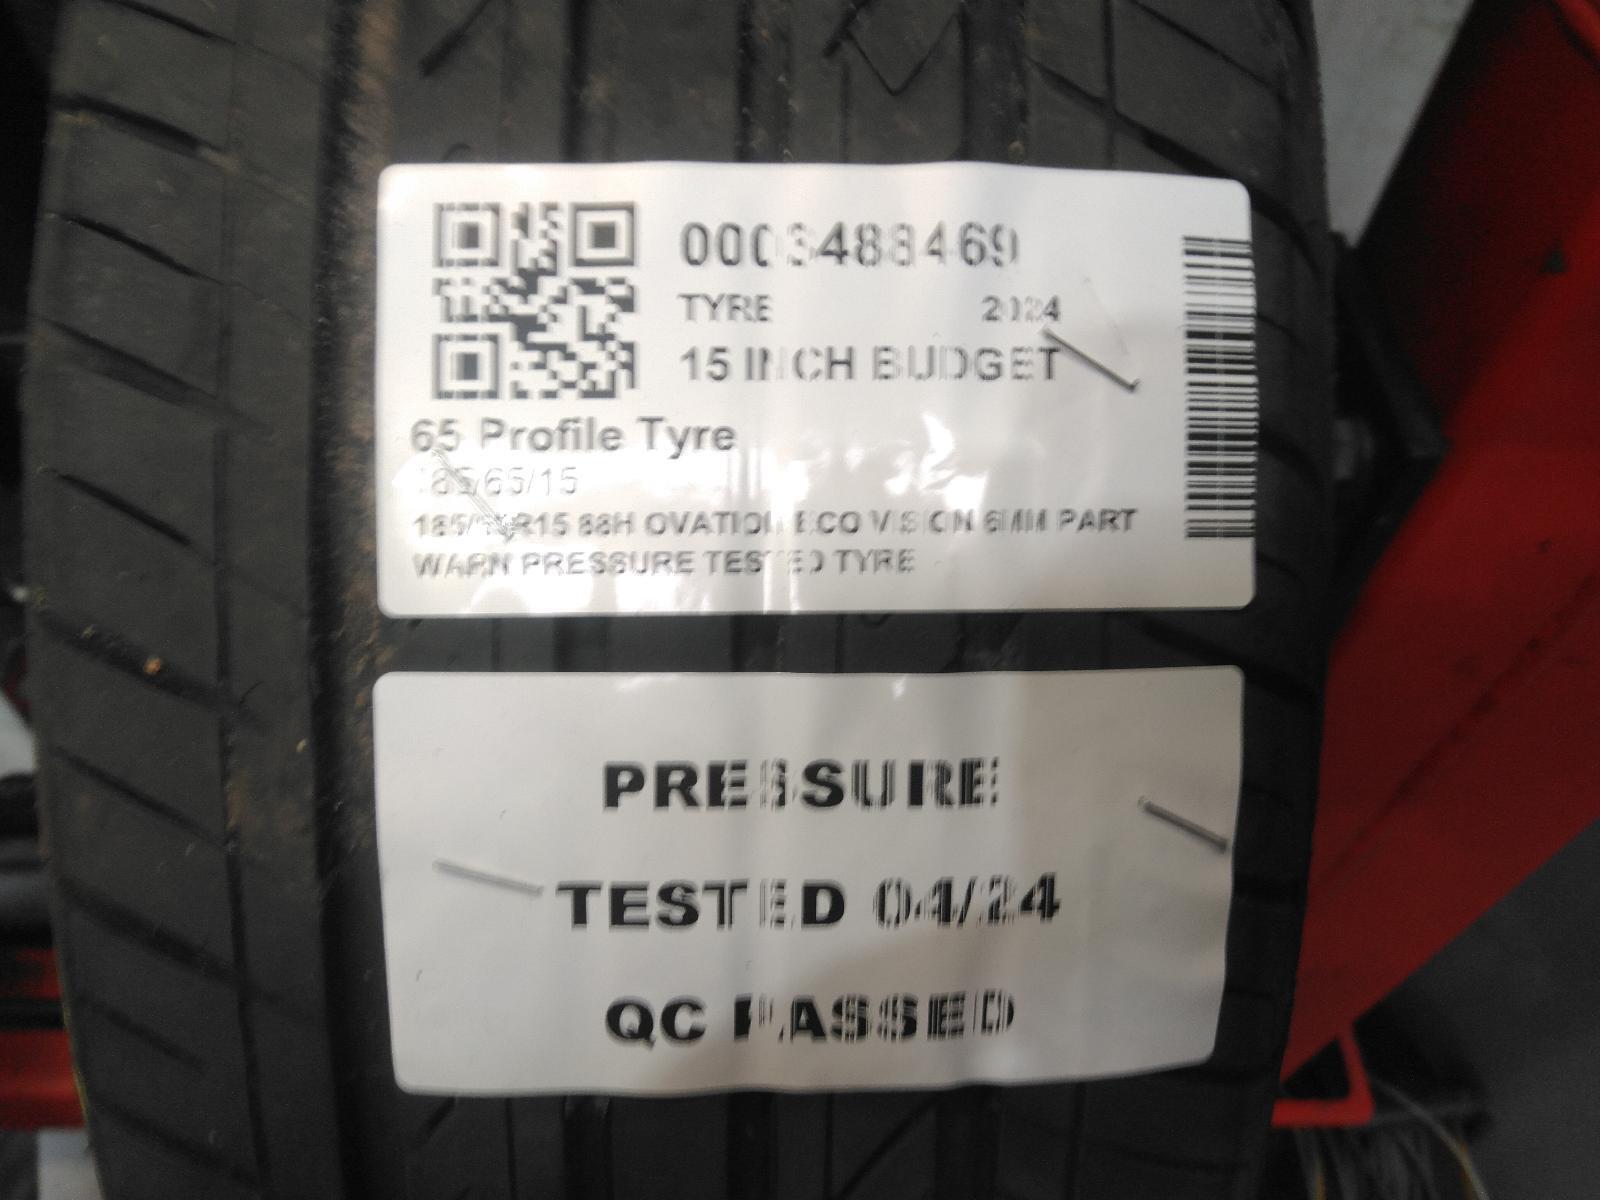 185/65R15 88H OVATION ECO VISION 6MM PART WARN PRESSURE TESTED TYRE